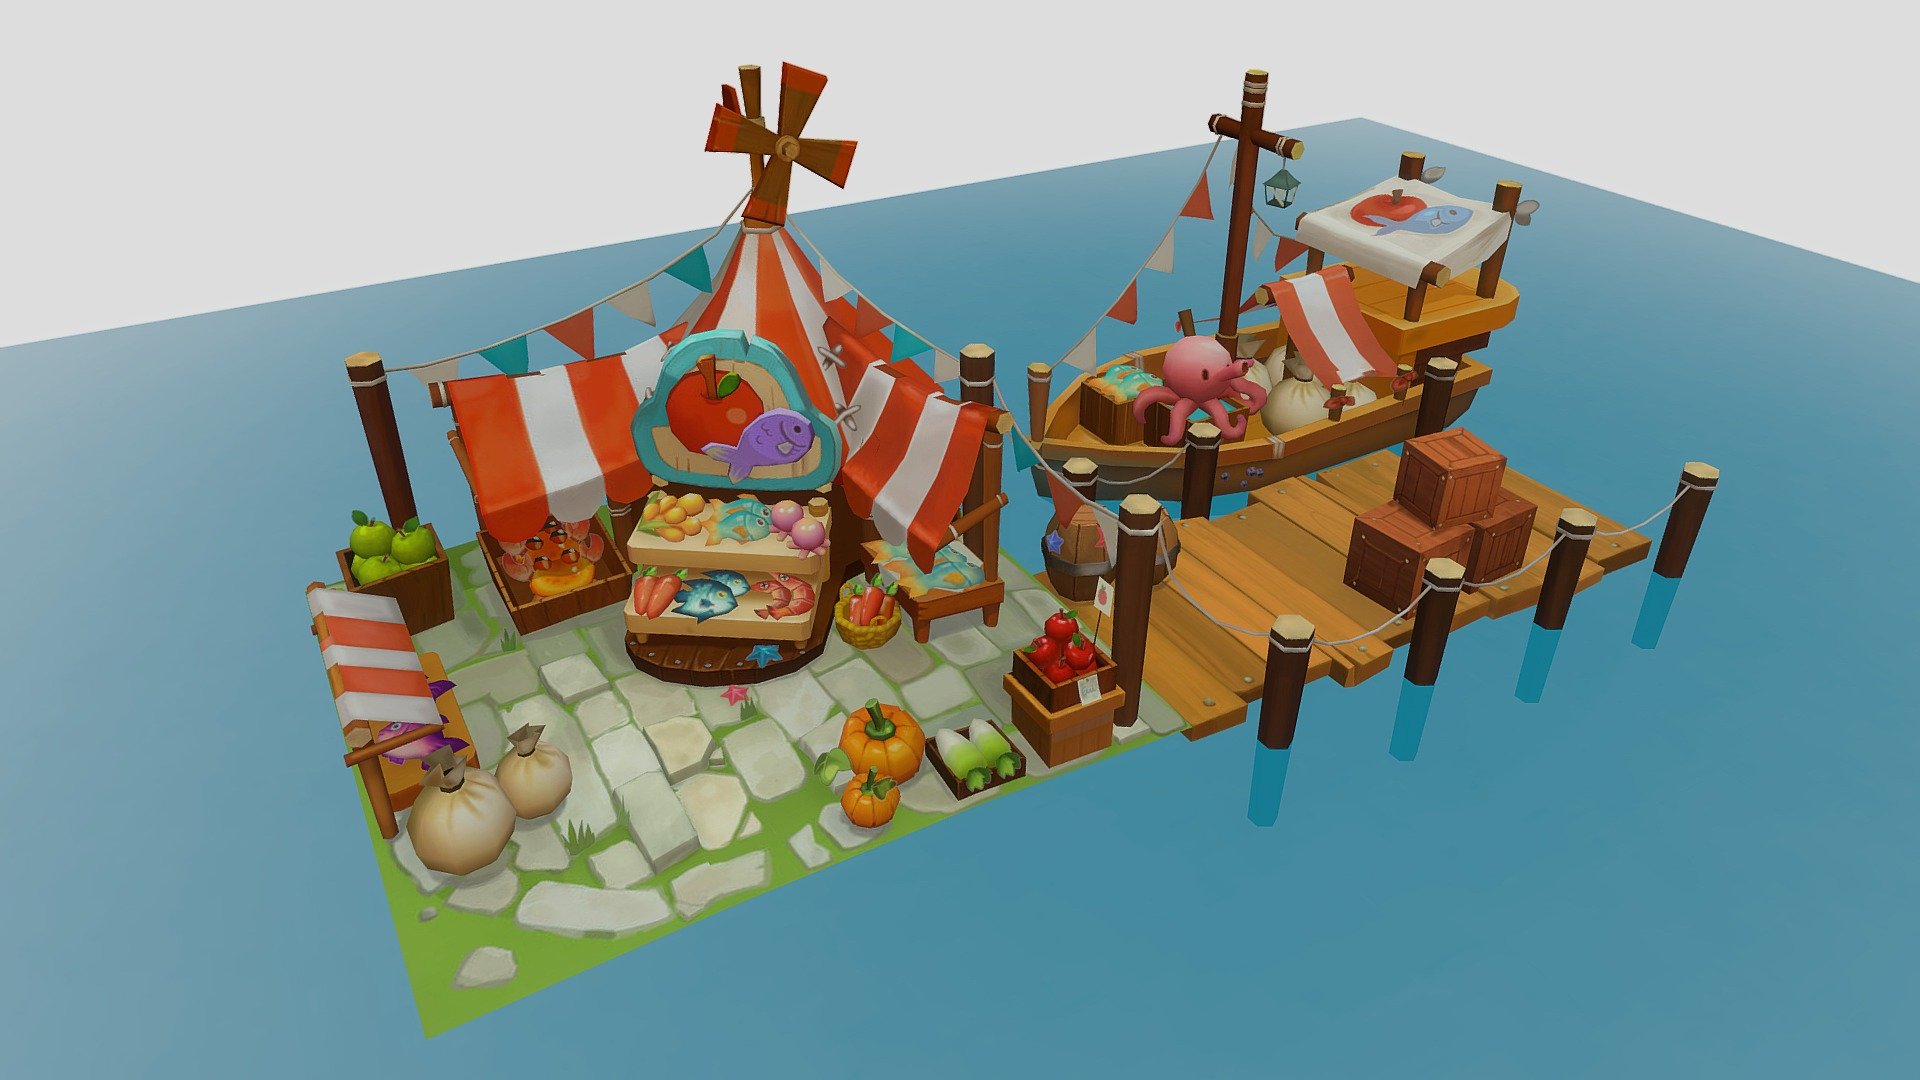 Stylized Isometric Big Sea Market Hand Painted,
Low poly - Modeled in Maya,
Hand Painted in Photoshop and baked in Substance Painter
Concept by WHJ - Sea Market - 3D model by Emi Starkman (@Emiliyana) 3d model